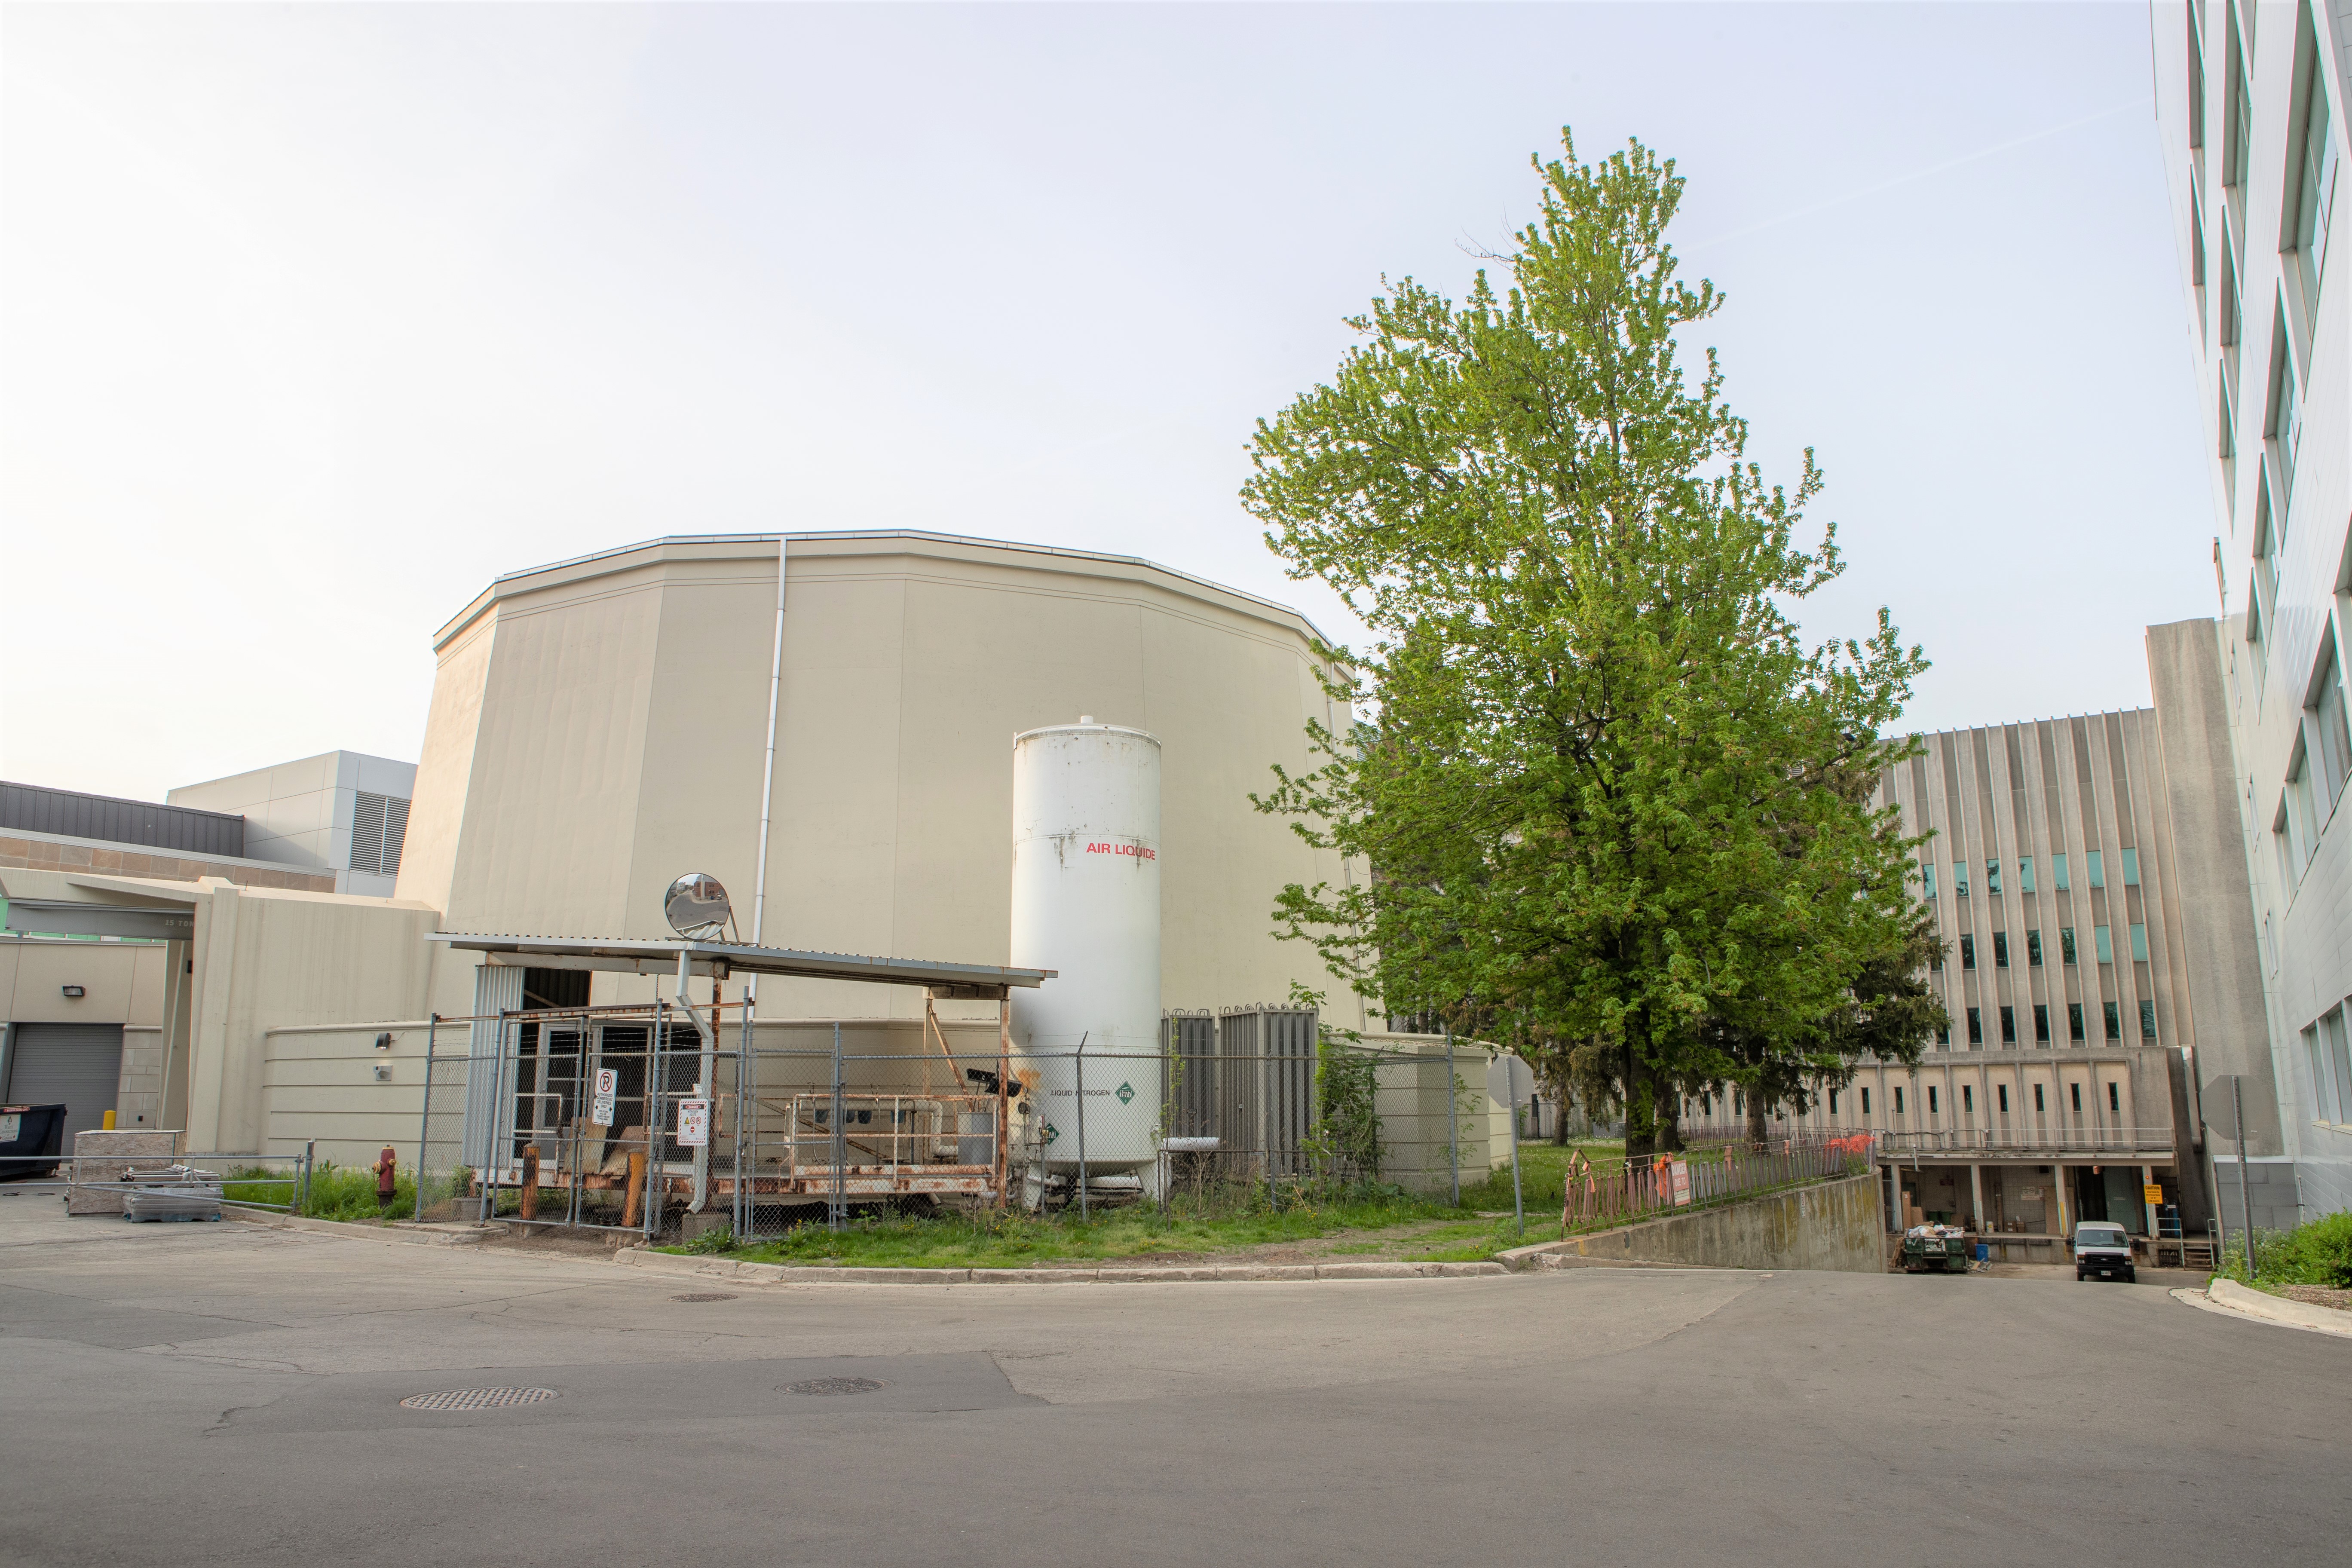 Exterior of the McMaster Nuclear Reactor.